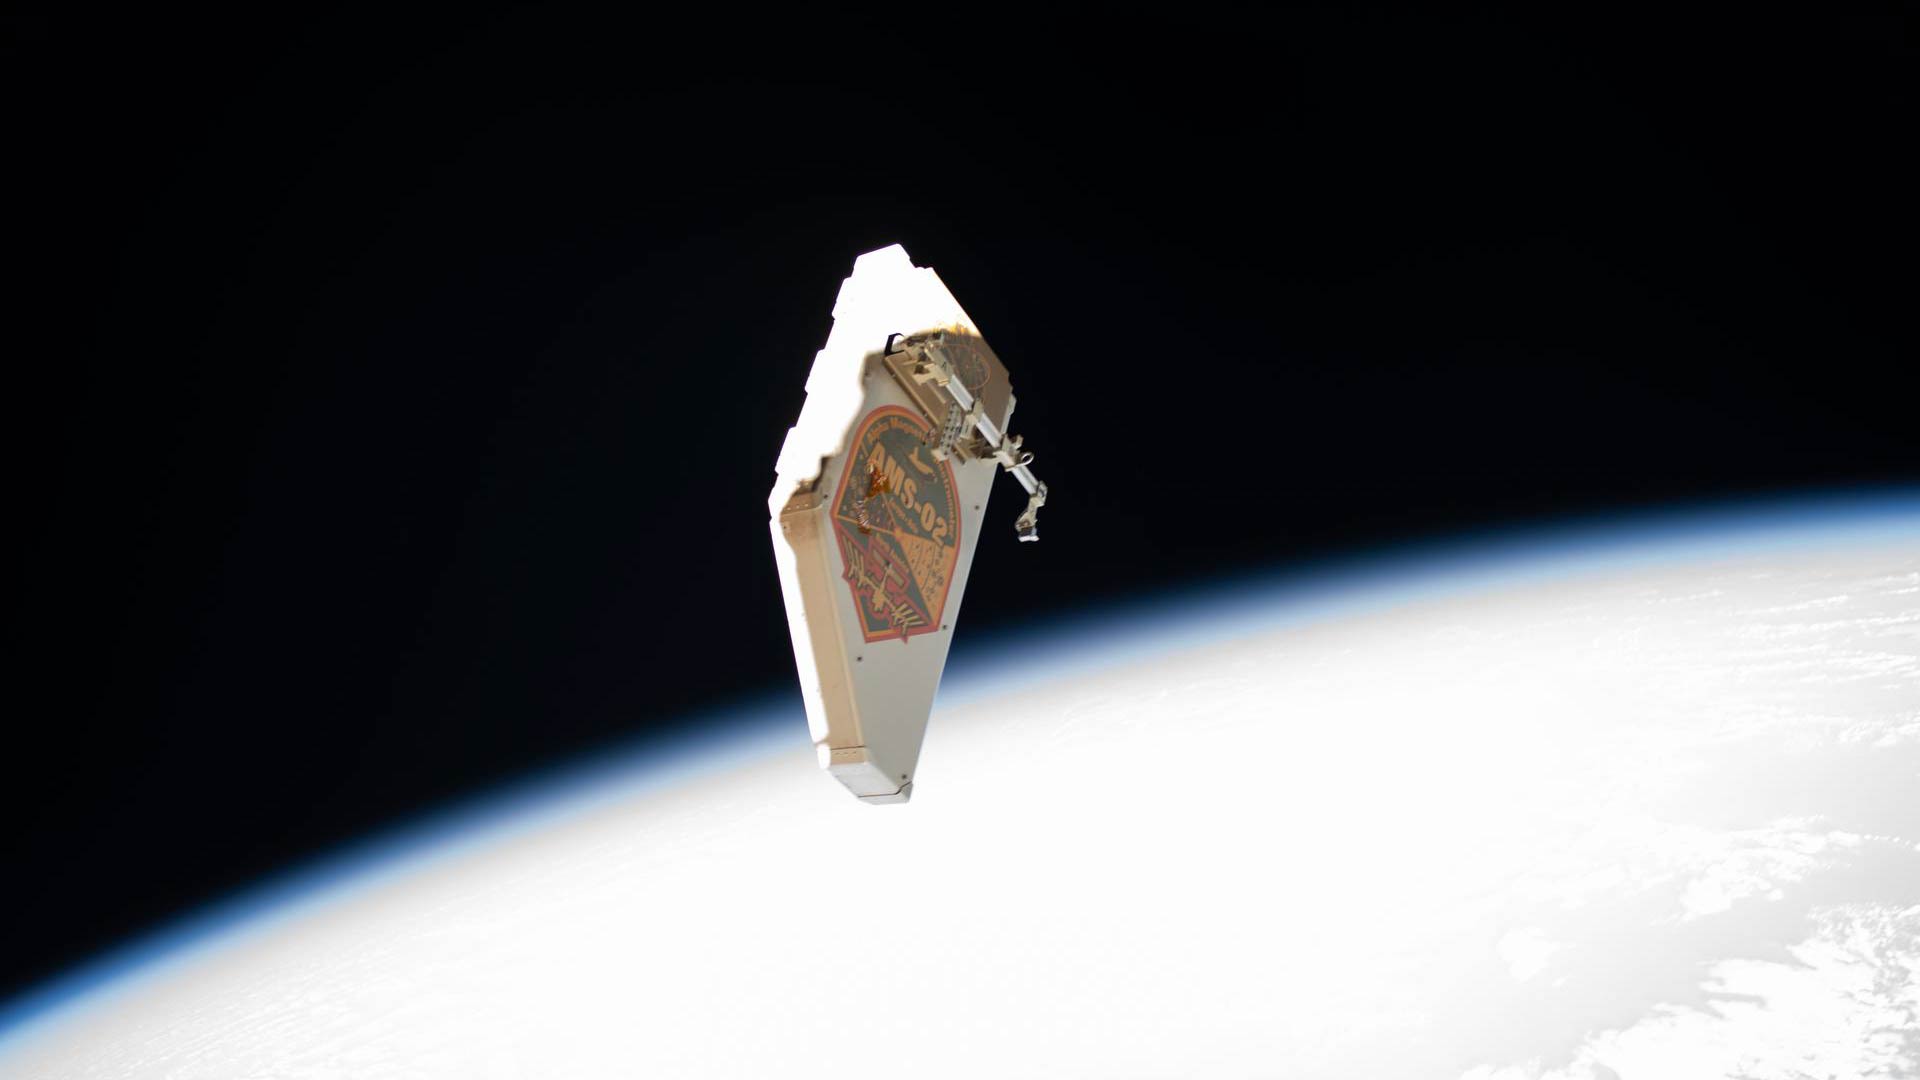 A debris shield that was removed from the Alpha Magnetic Spectrometer (AMS), the International Space Station's cosmic particle detector, is pictured drifting away from the orbiting lab.